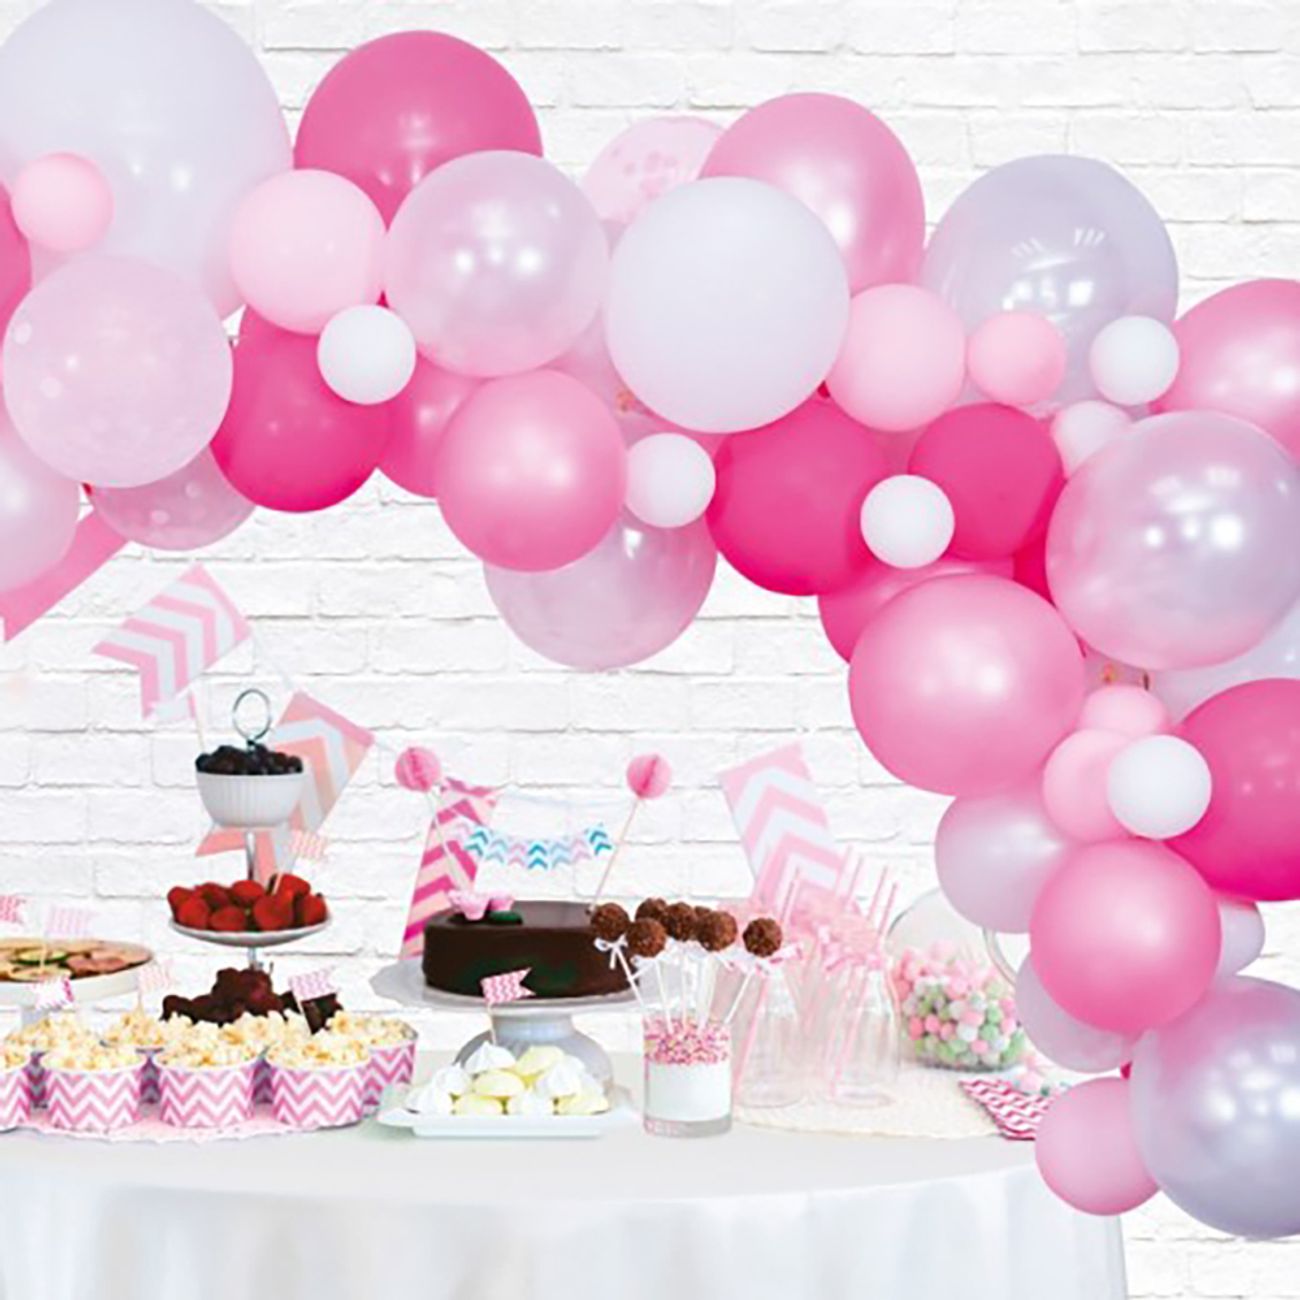 ballongbage-pink-party-1